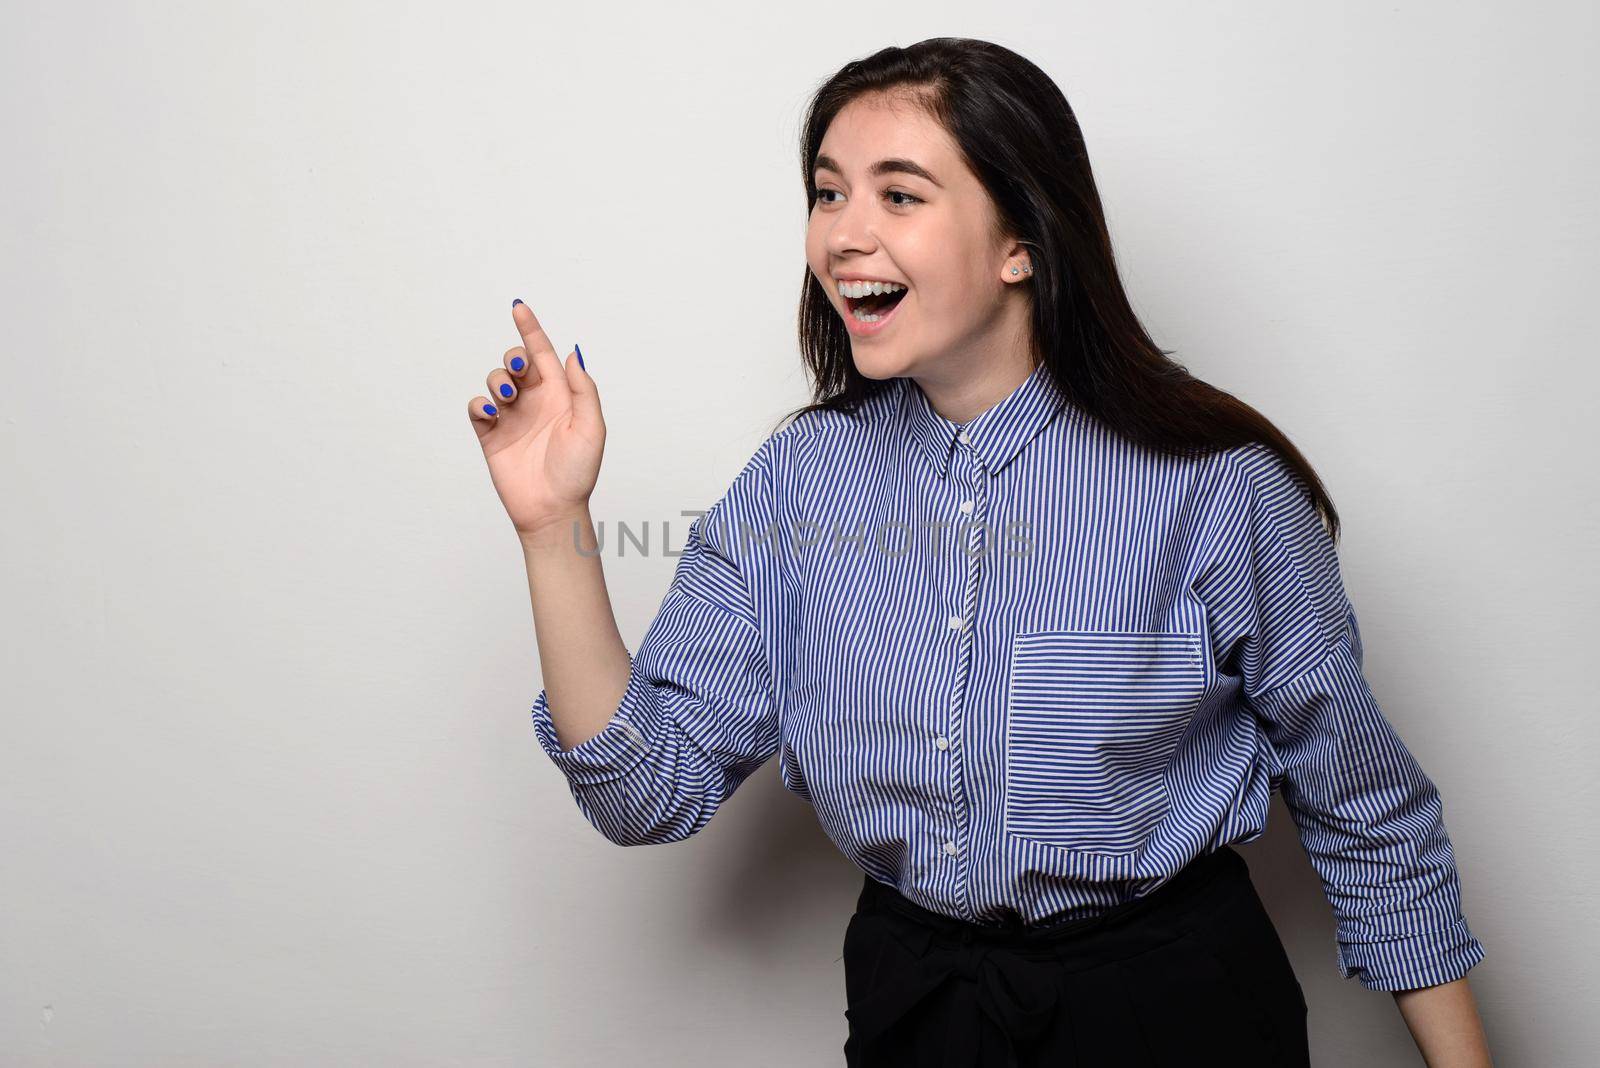 Excited young woman pointing her finger towards blank space standing at white wall